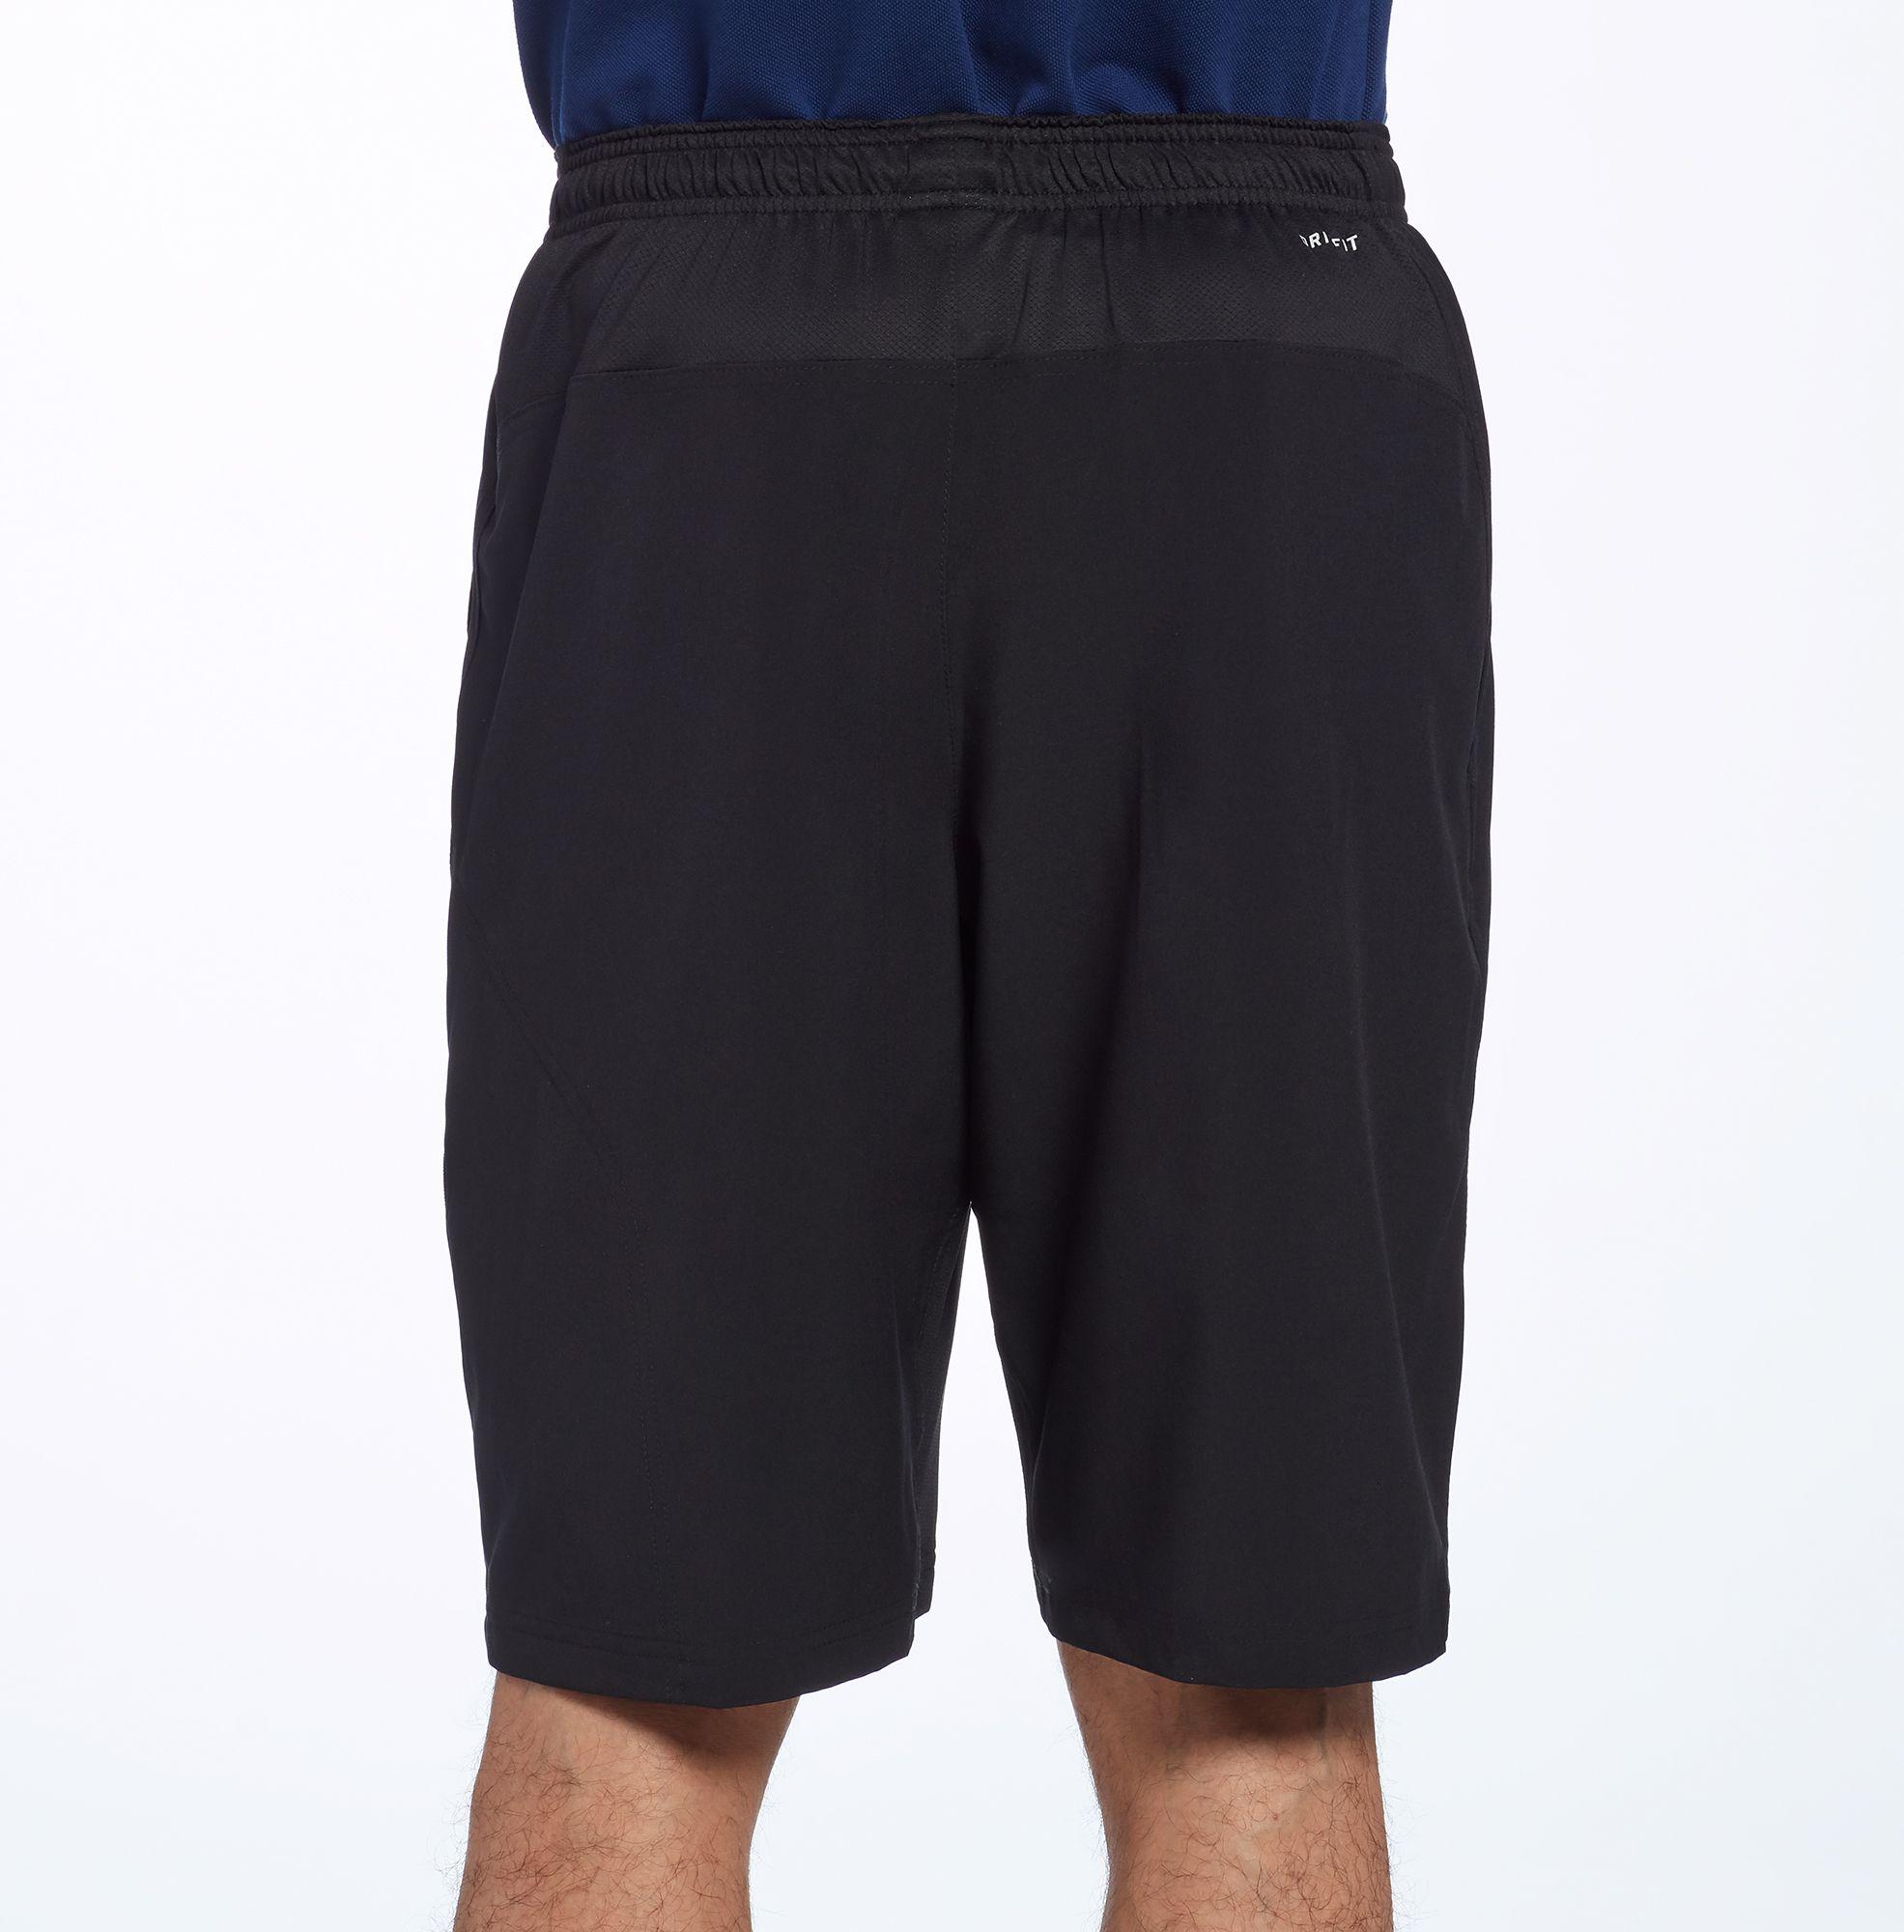 Nike Synthetic N.e.t 11'' Woven Tennis Shorts in Black for Men - Lyst